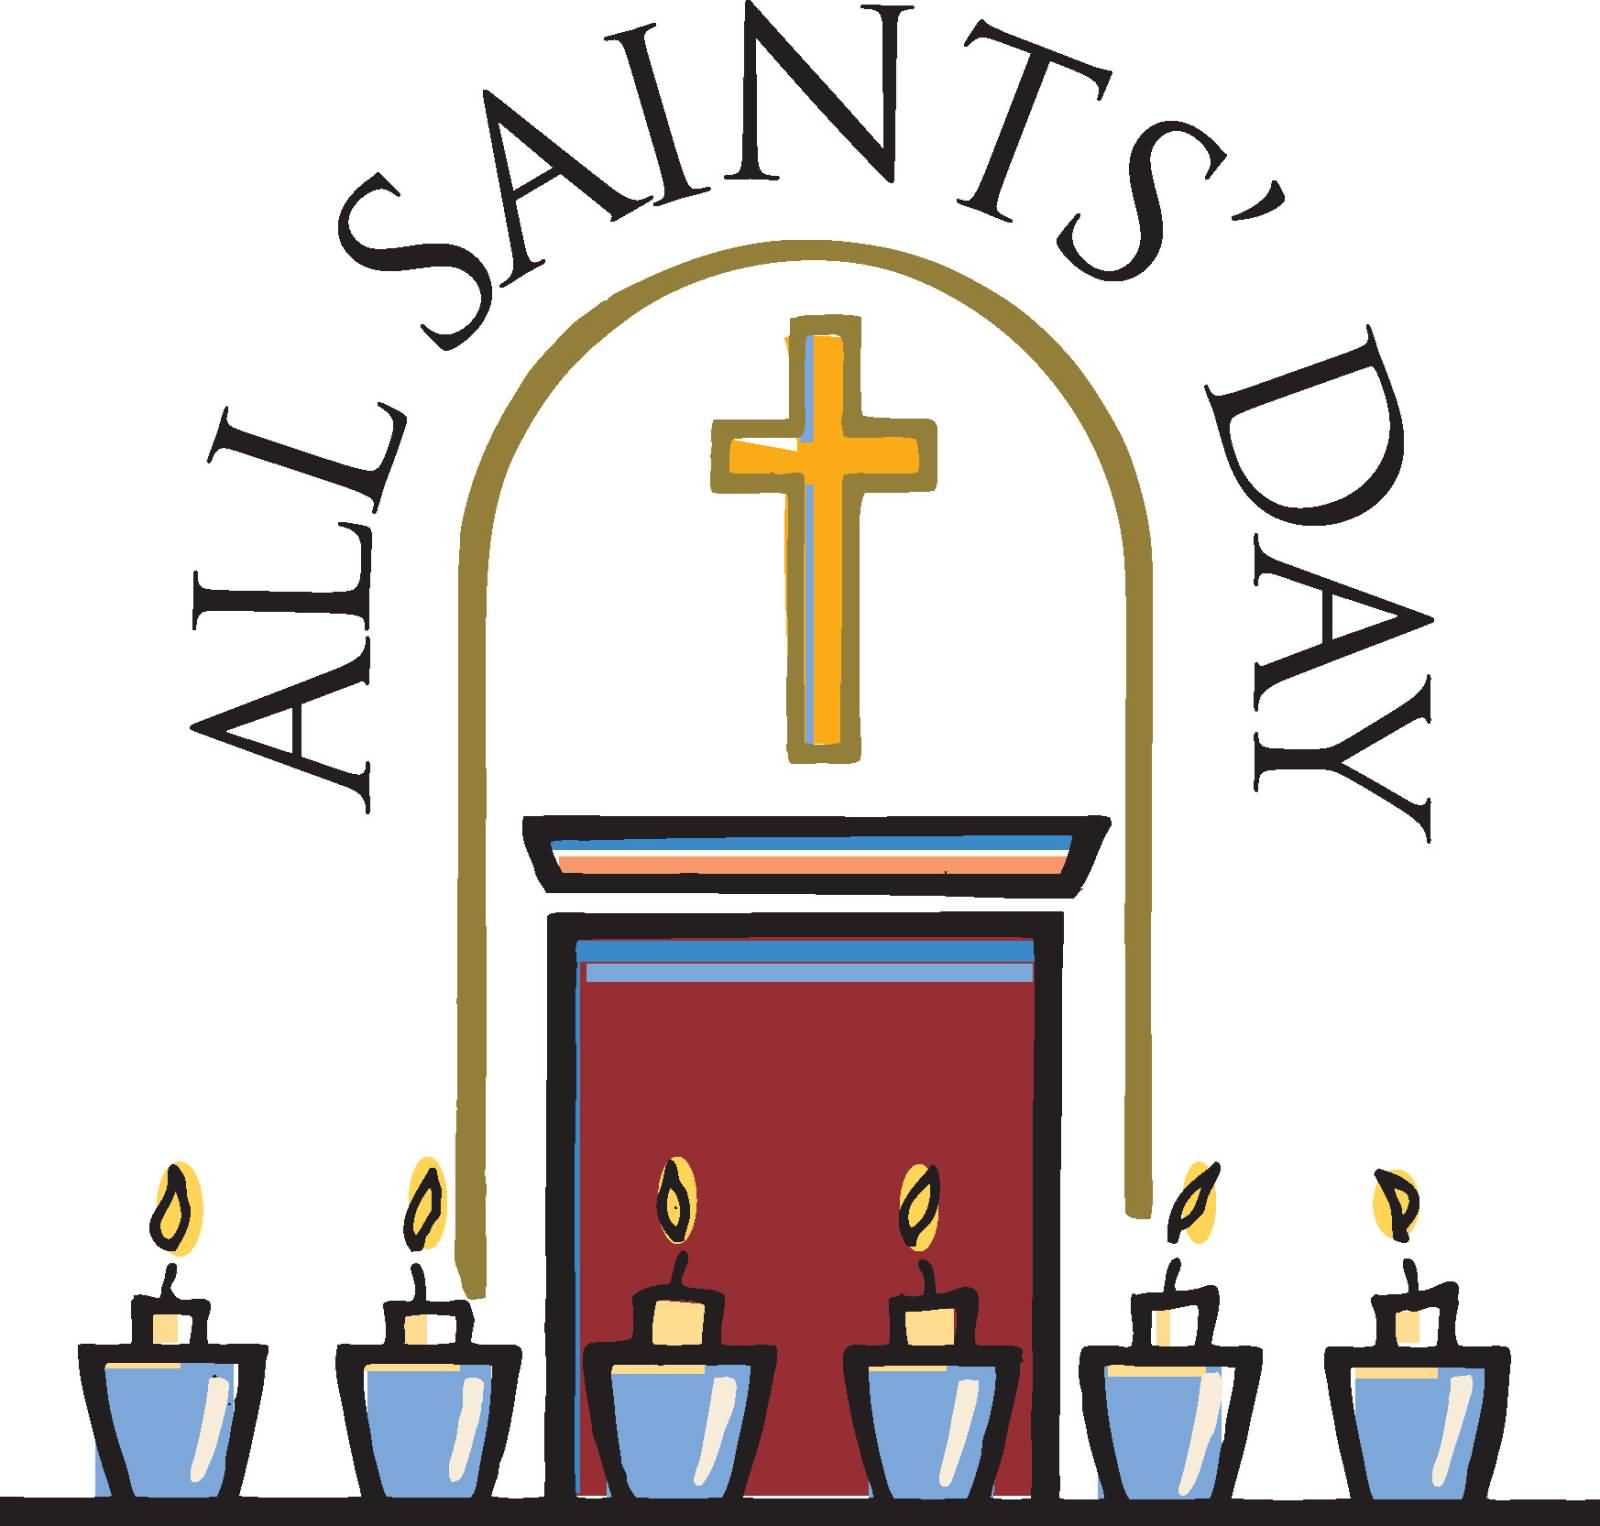 All Saints’ Day 2019 Facts, Prayers, Meaning, Images, and Traditions